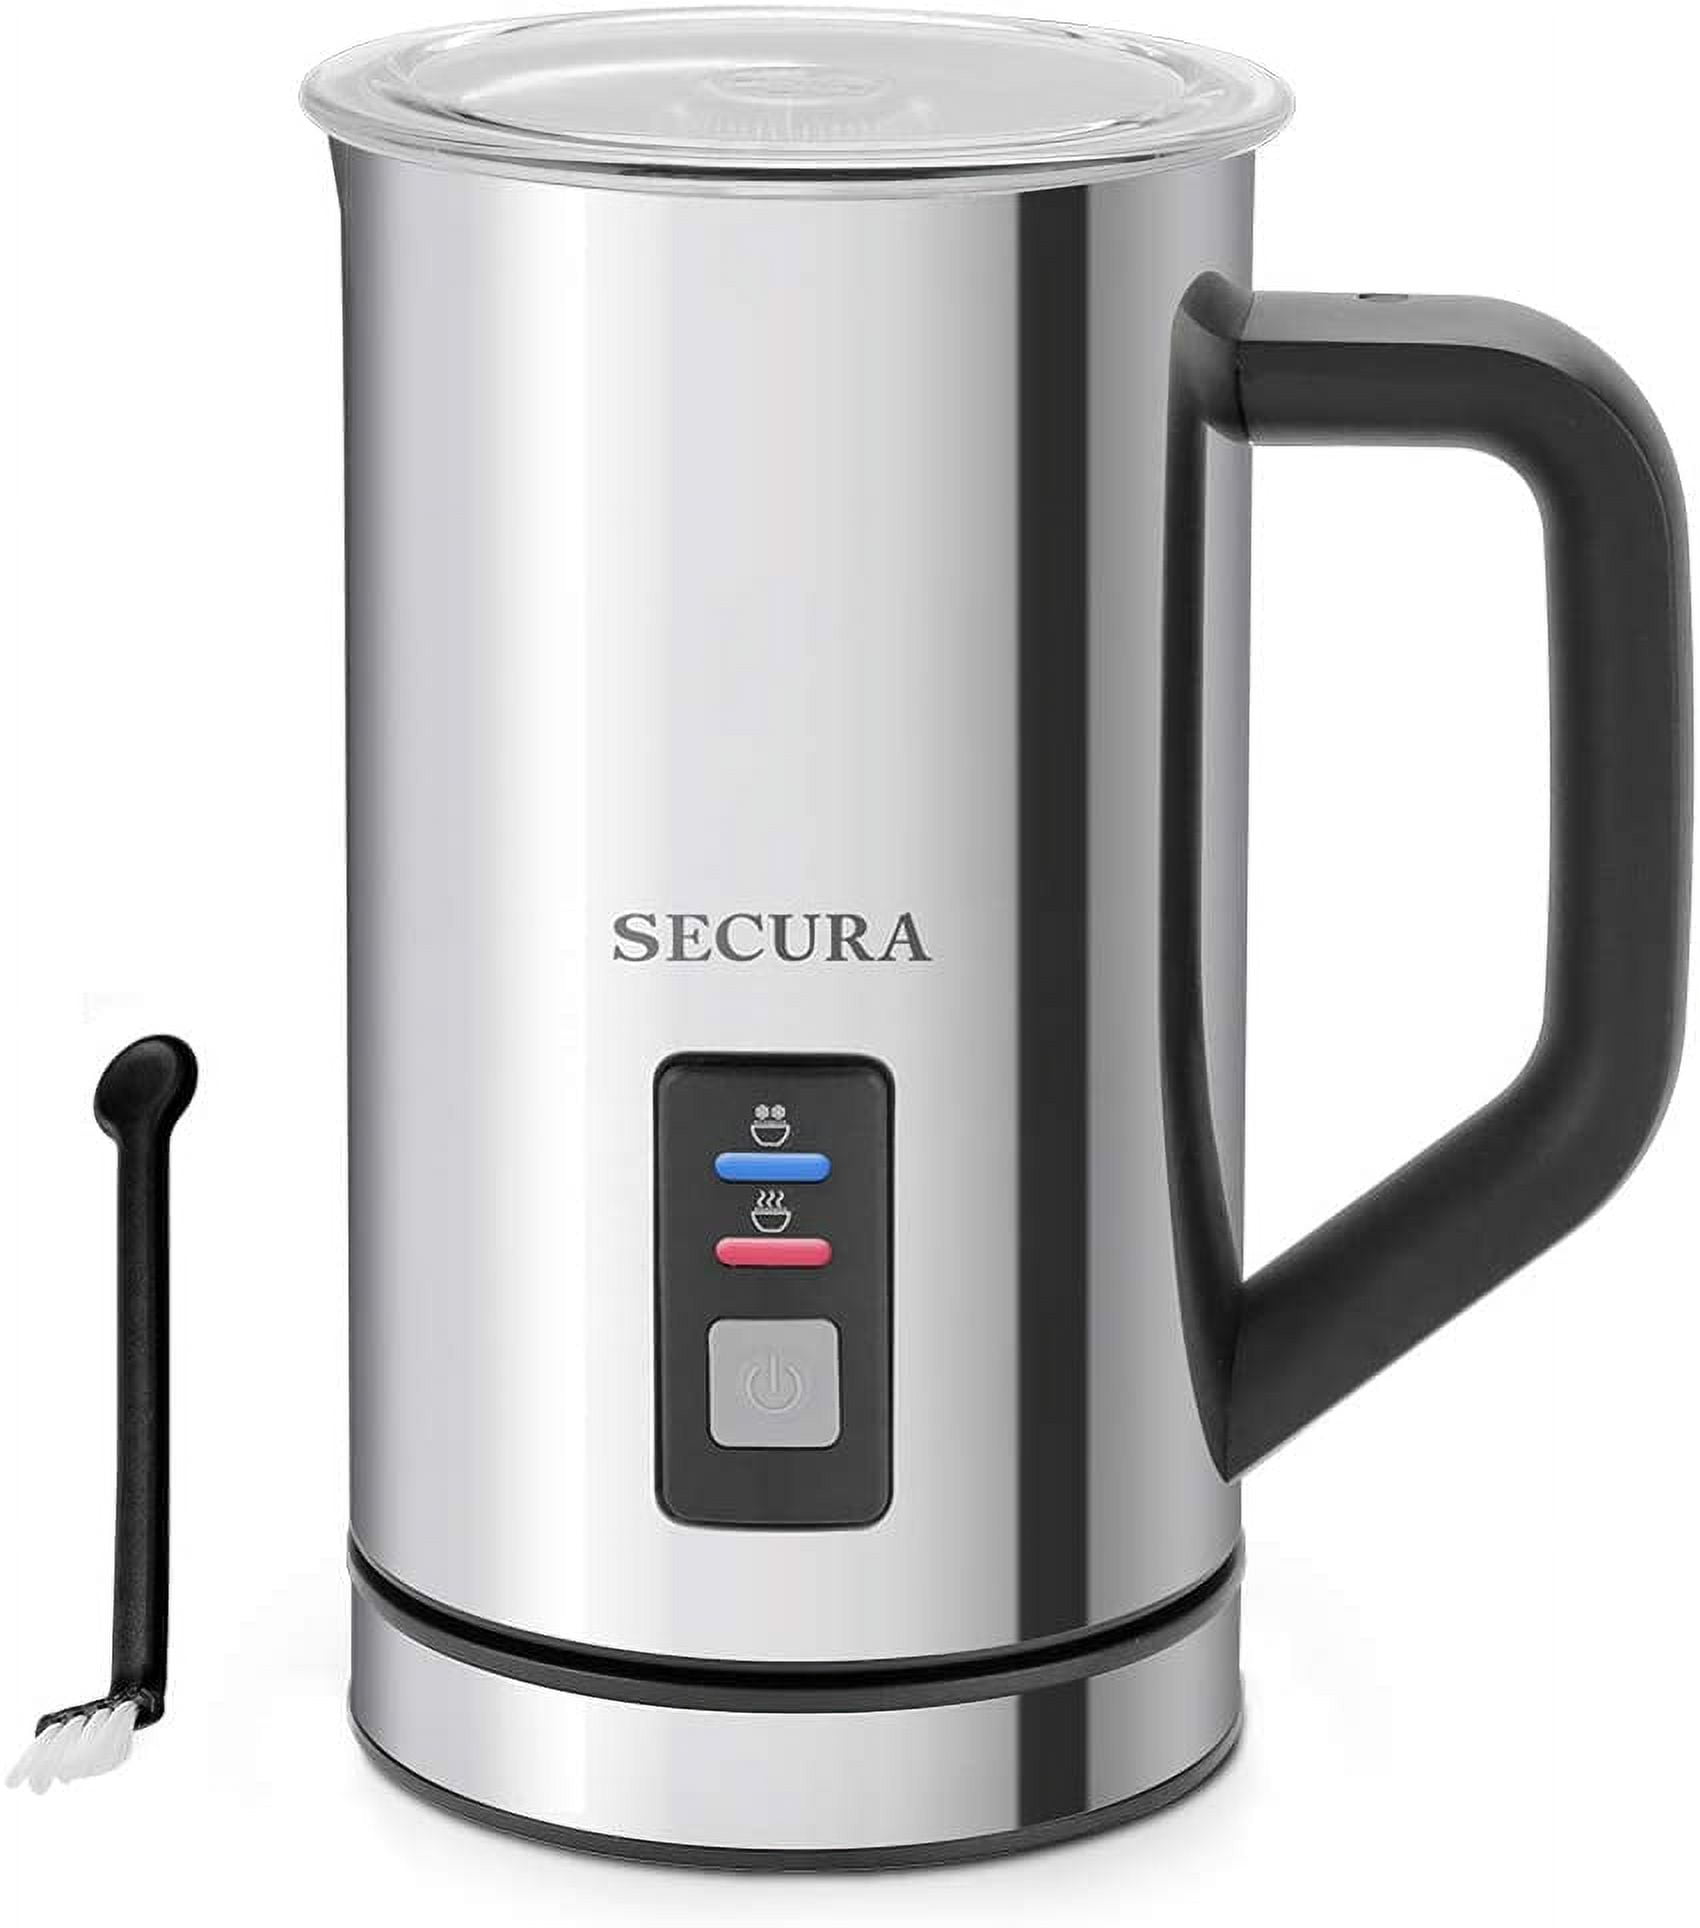 Secura Detachable Milk Frother, 17oz Electric Milk Steamer Stainless Steel,  Automatic Hot/Cold Foam and Hot Chocolate Maker with Dishwasher Safe, 120V  